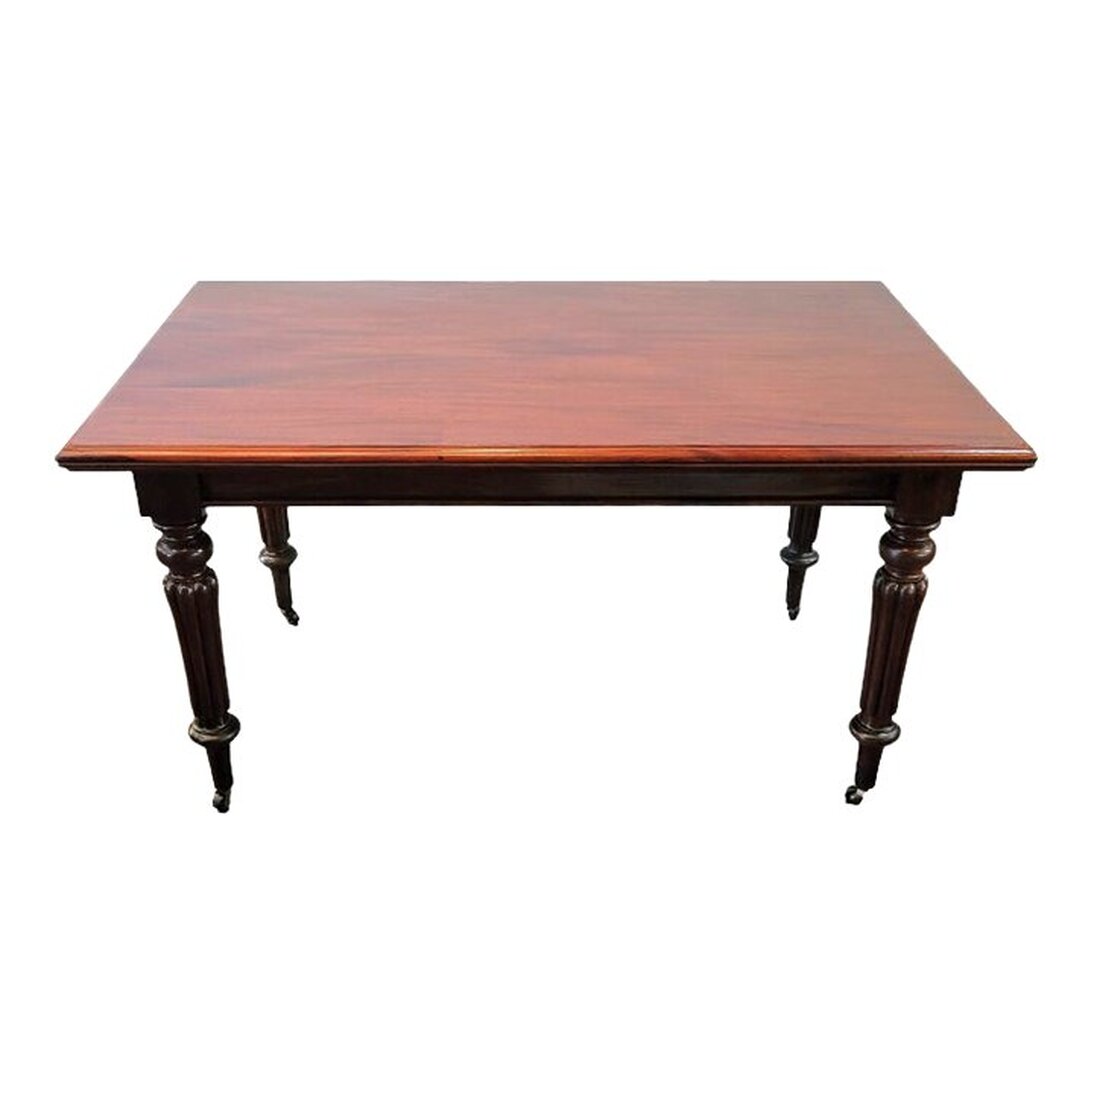 Antique Santo Domingo mahogany table attributed to Gillows of Lancaster works perfectly as a library table, dining table, café table, writing desk, and work table. The molded-edge rectangular table top shows off the beautiful qualities of Santo Domingo mahogany wood - the rich color, burled figure, and distinctive ribbon grain common to mahogany.  The plain apron has a molded bottom edge.  The four corner blocks surmount the turned, ringed, and tapered legs. The legs are reeded through the middle. The legs end in tapered arrow feet on castors.